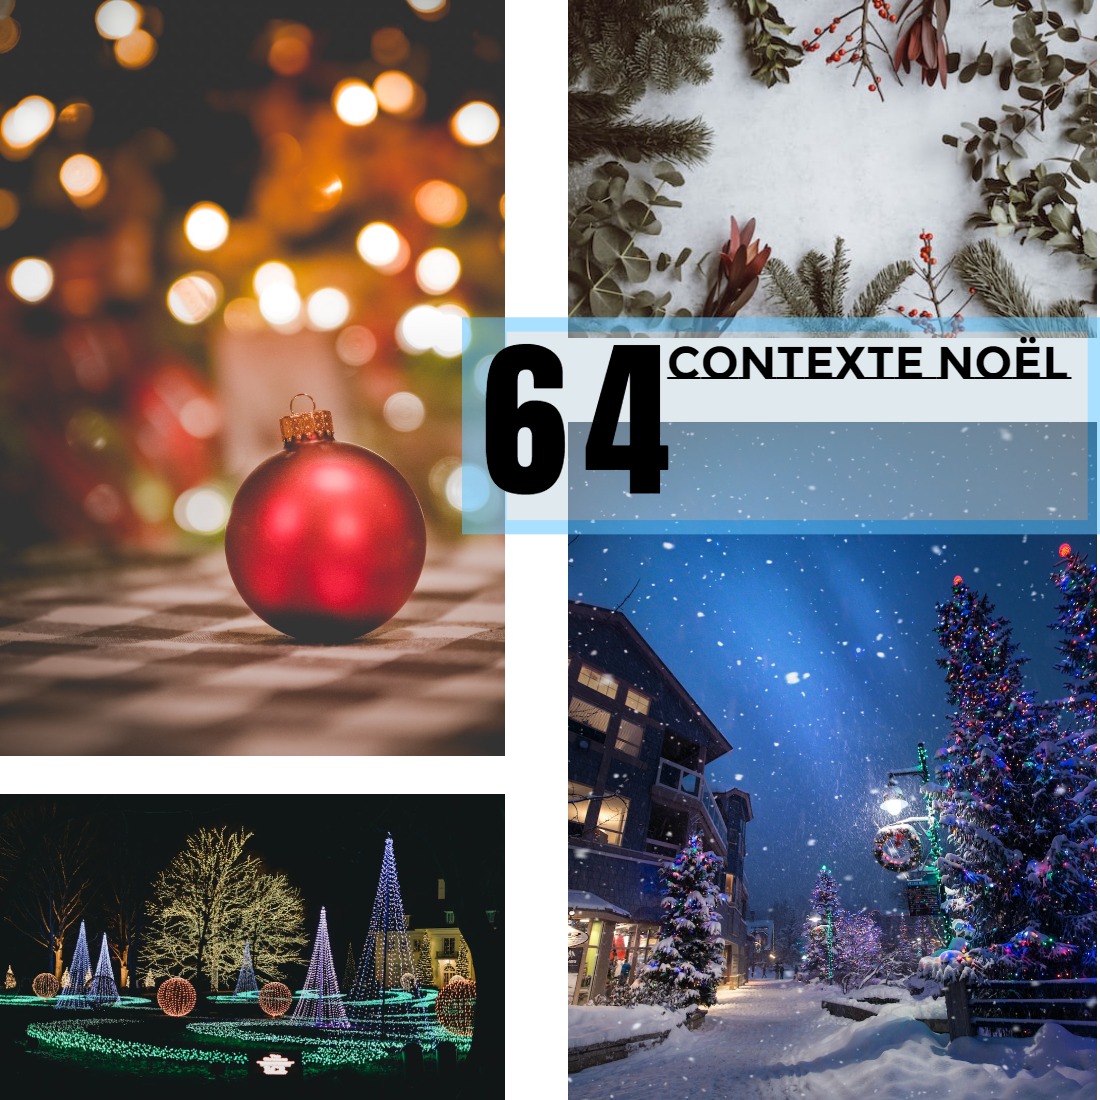 This bundle contains 64 festive JPG images of Christmas backgrounds that are sure to enchant you during the holiday season cover image.